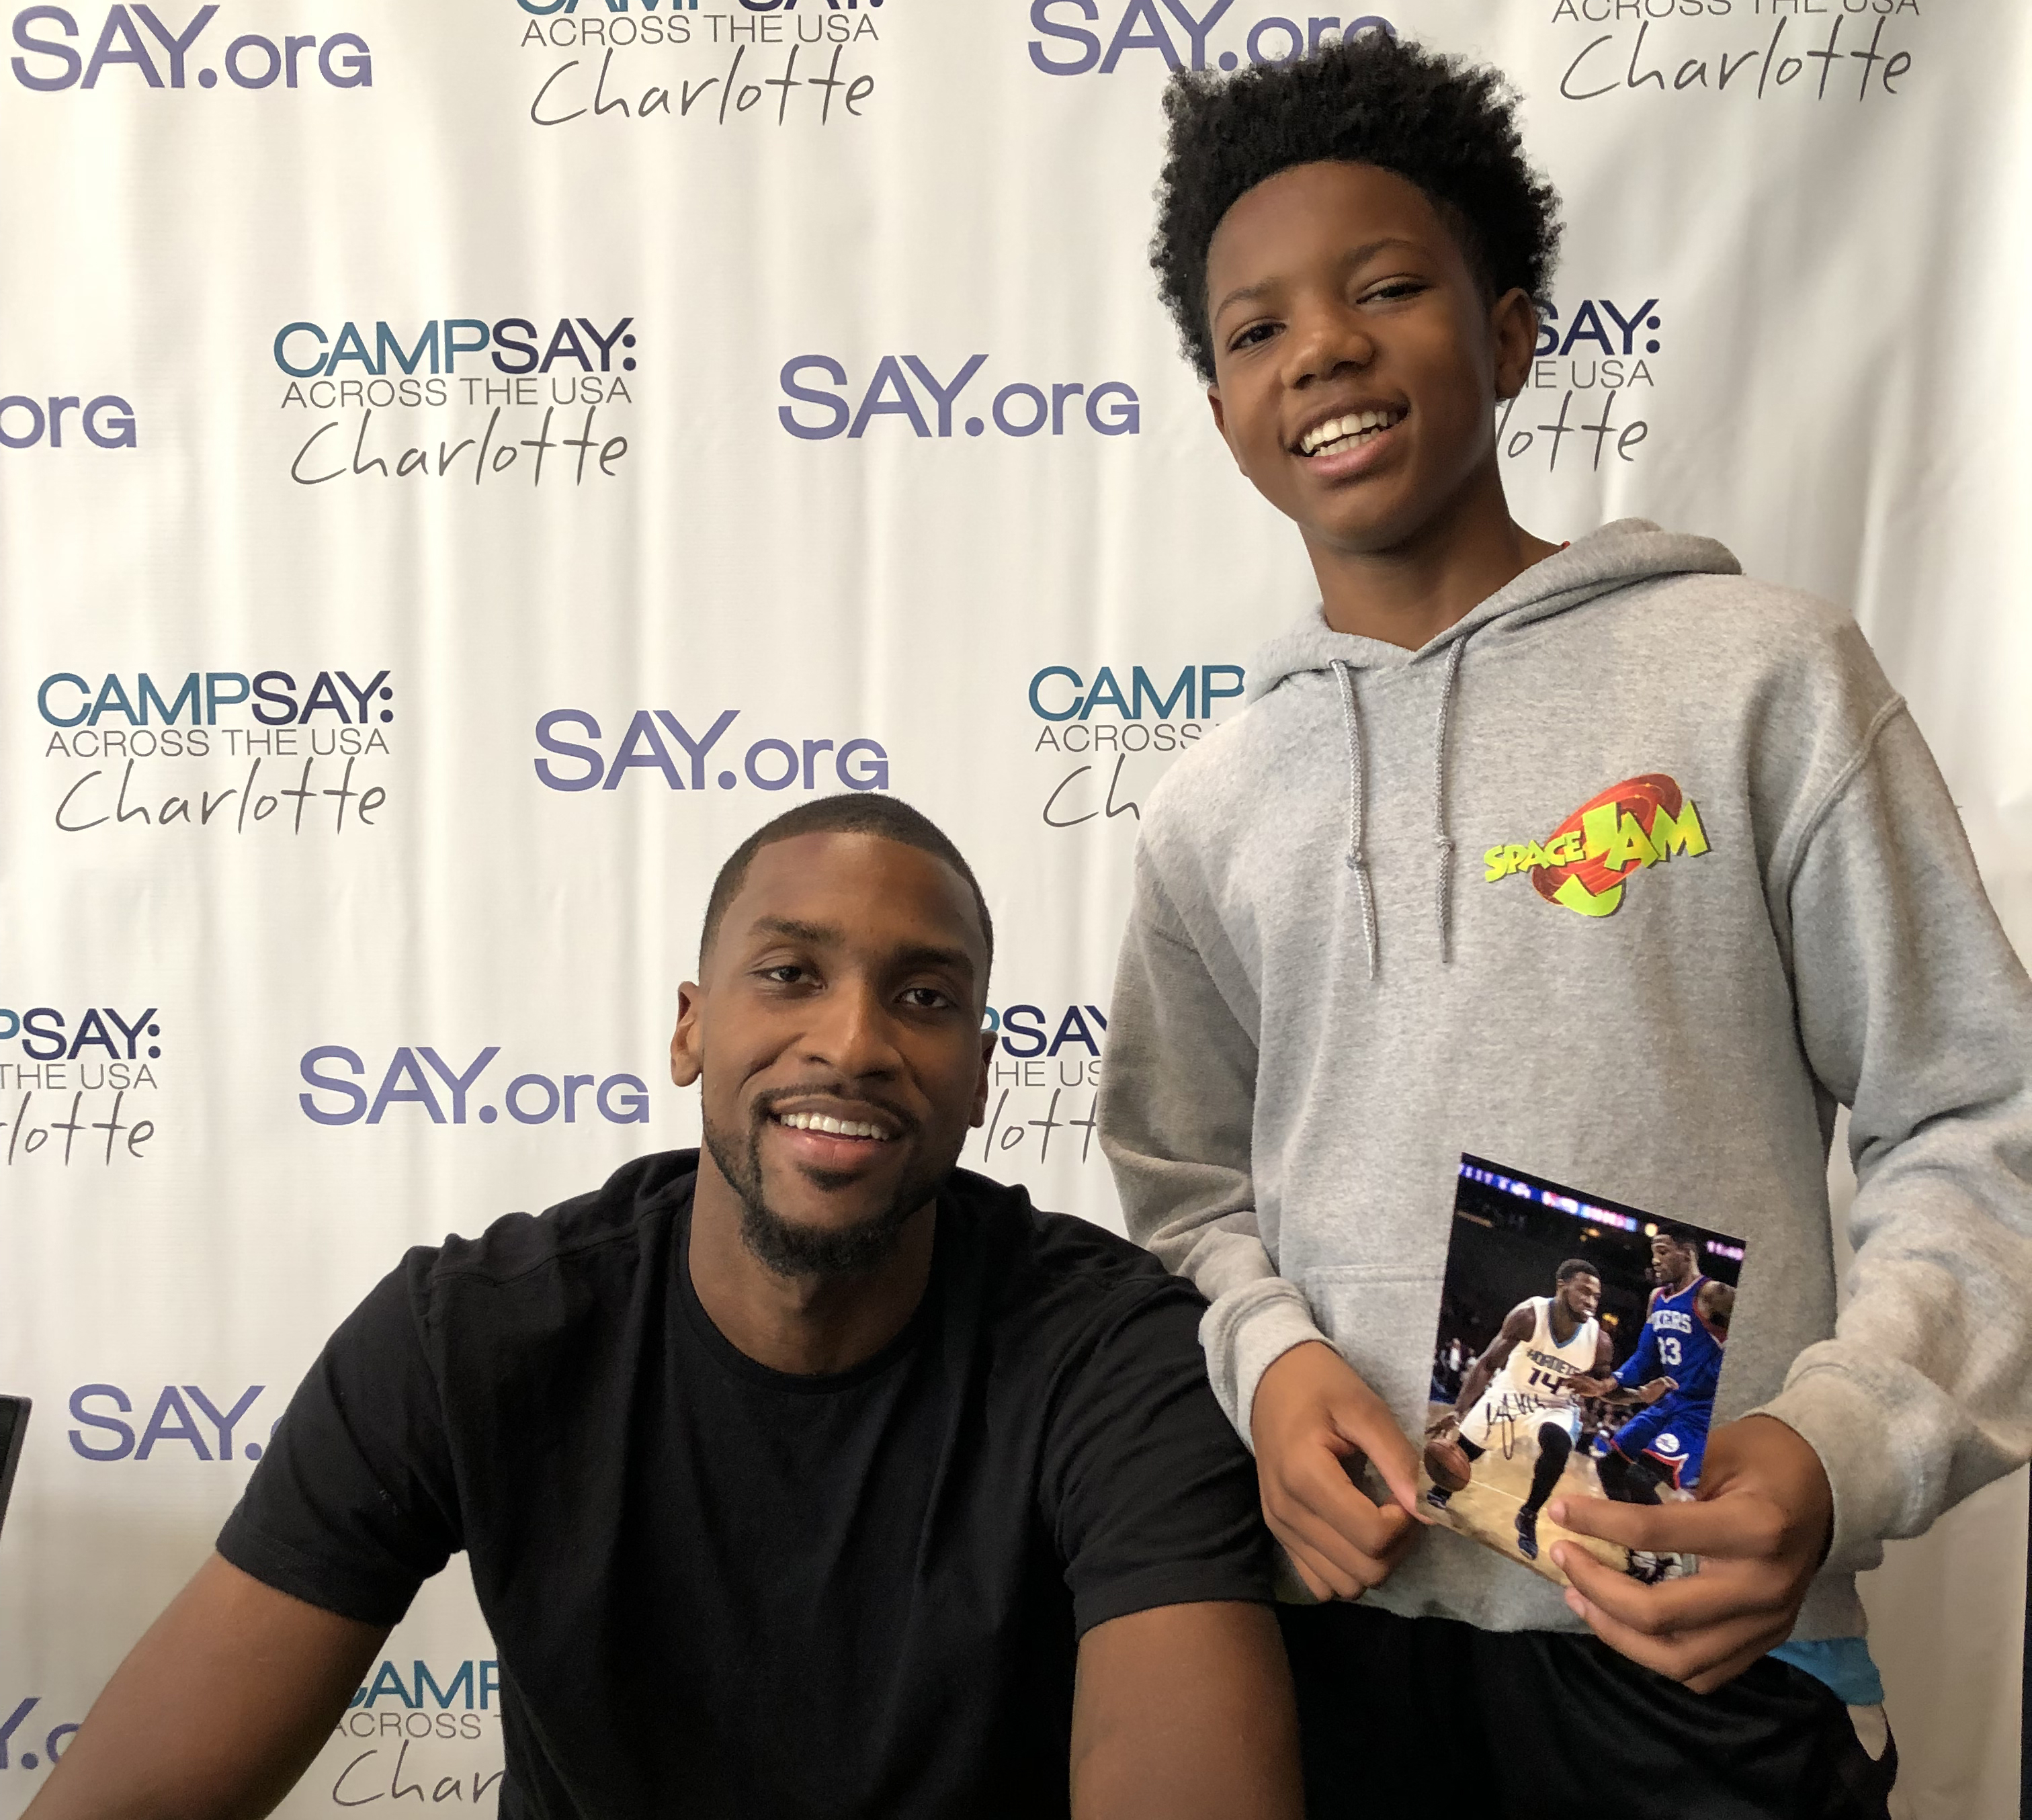 Camp SAY Across the USA: Charlotte hosted by Michael Kidd Gilchrist